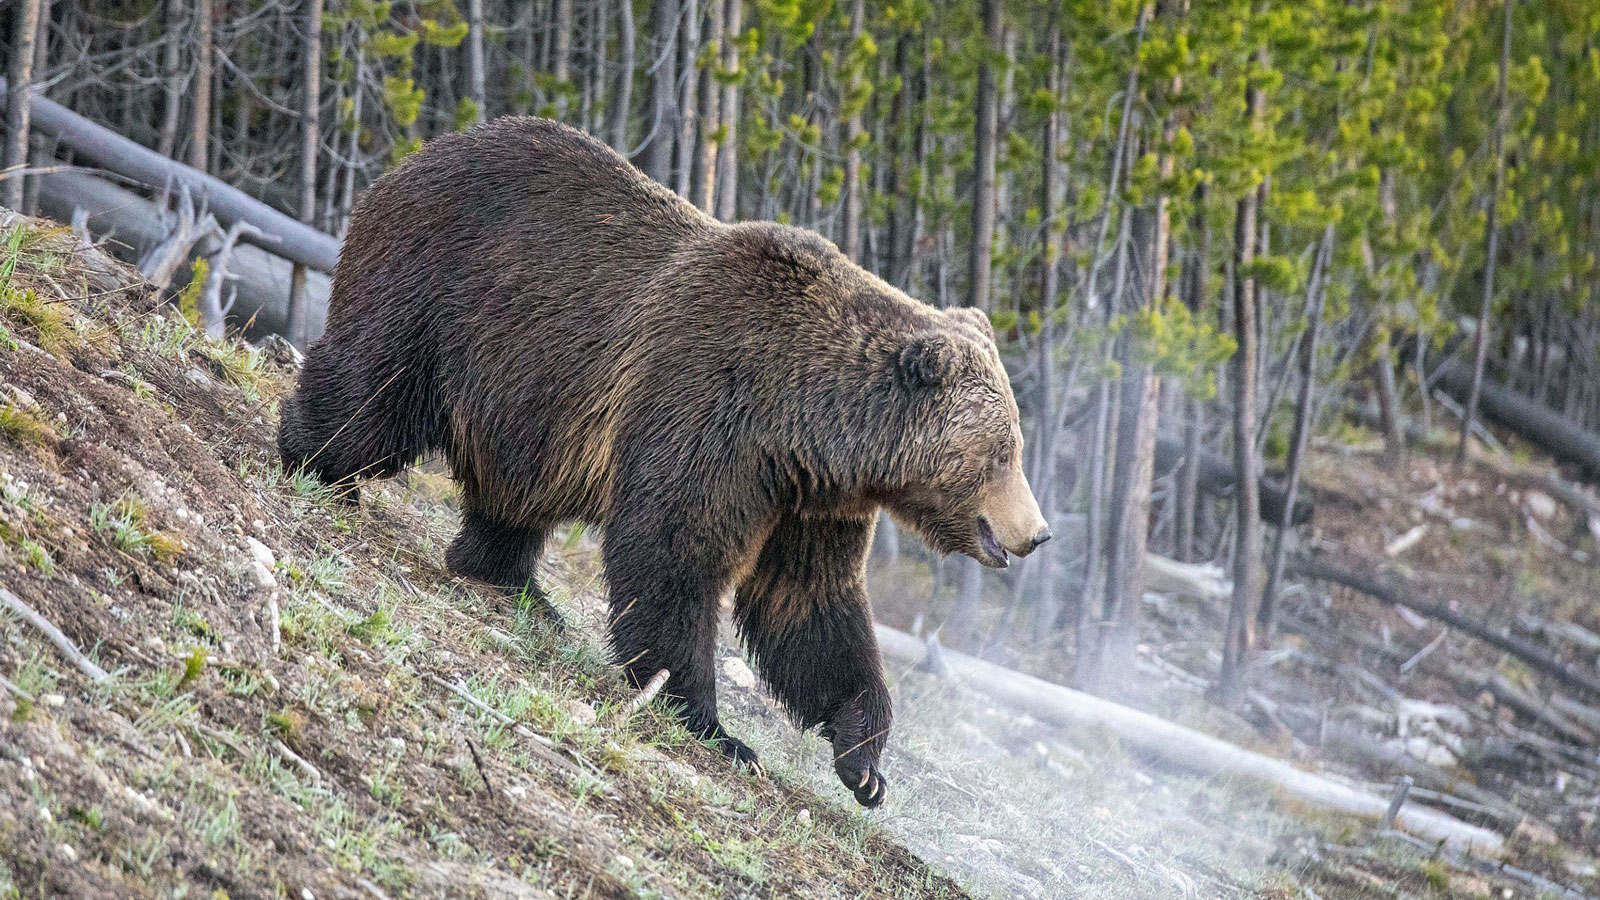 BOCC asks federal agencies to suspend efforts to reintroduce grizzly bears into North Cascades